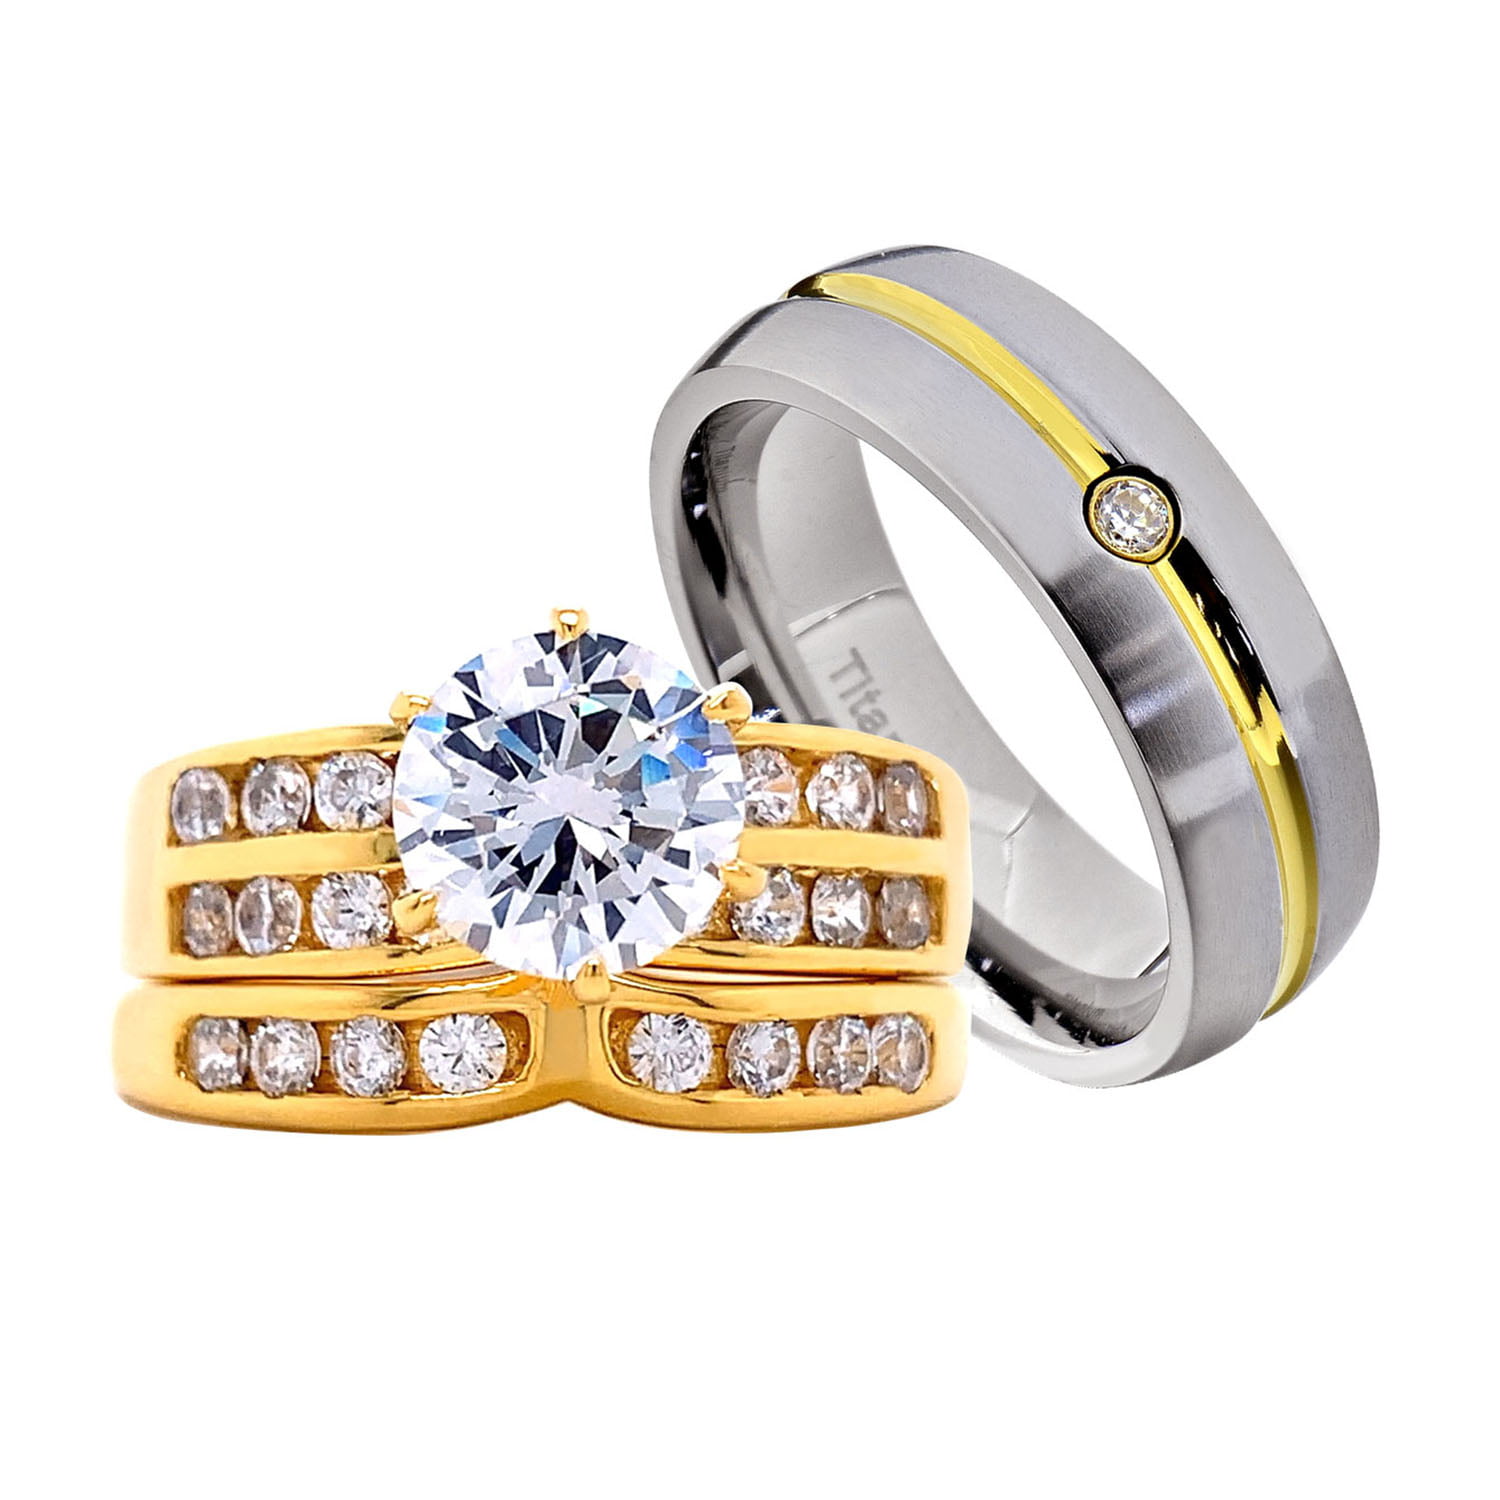 TVS-JEWELS His & Her 3-pc Trio Engagement Wedding Ring Band Set Round Cut White CZ 14k Gold Plated 